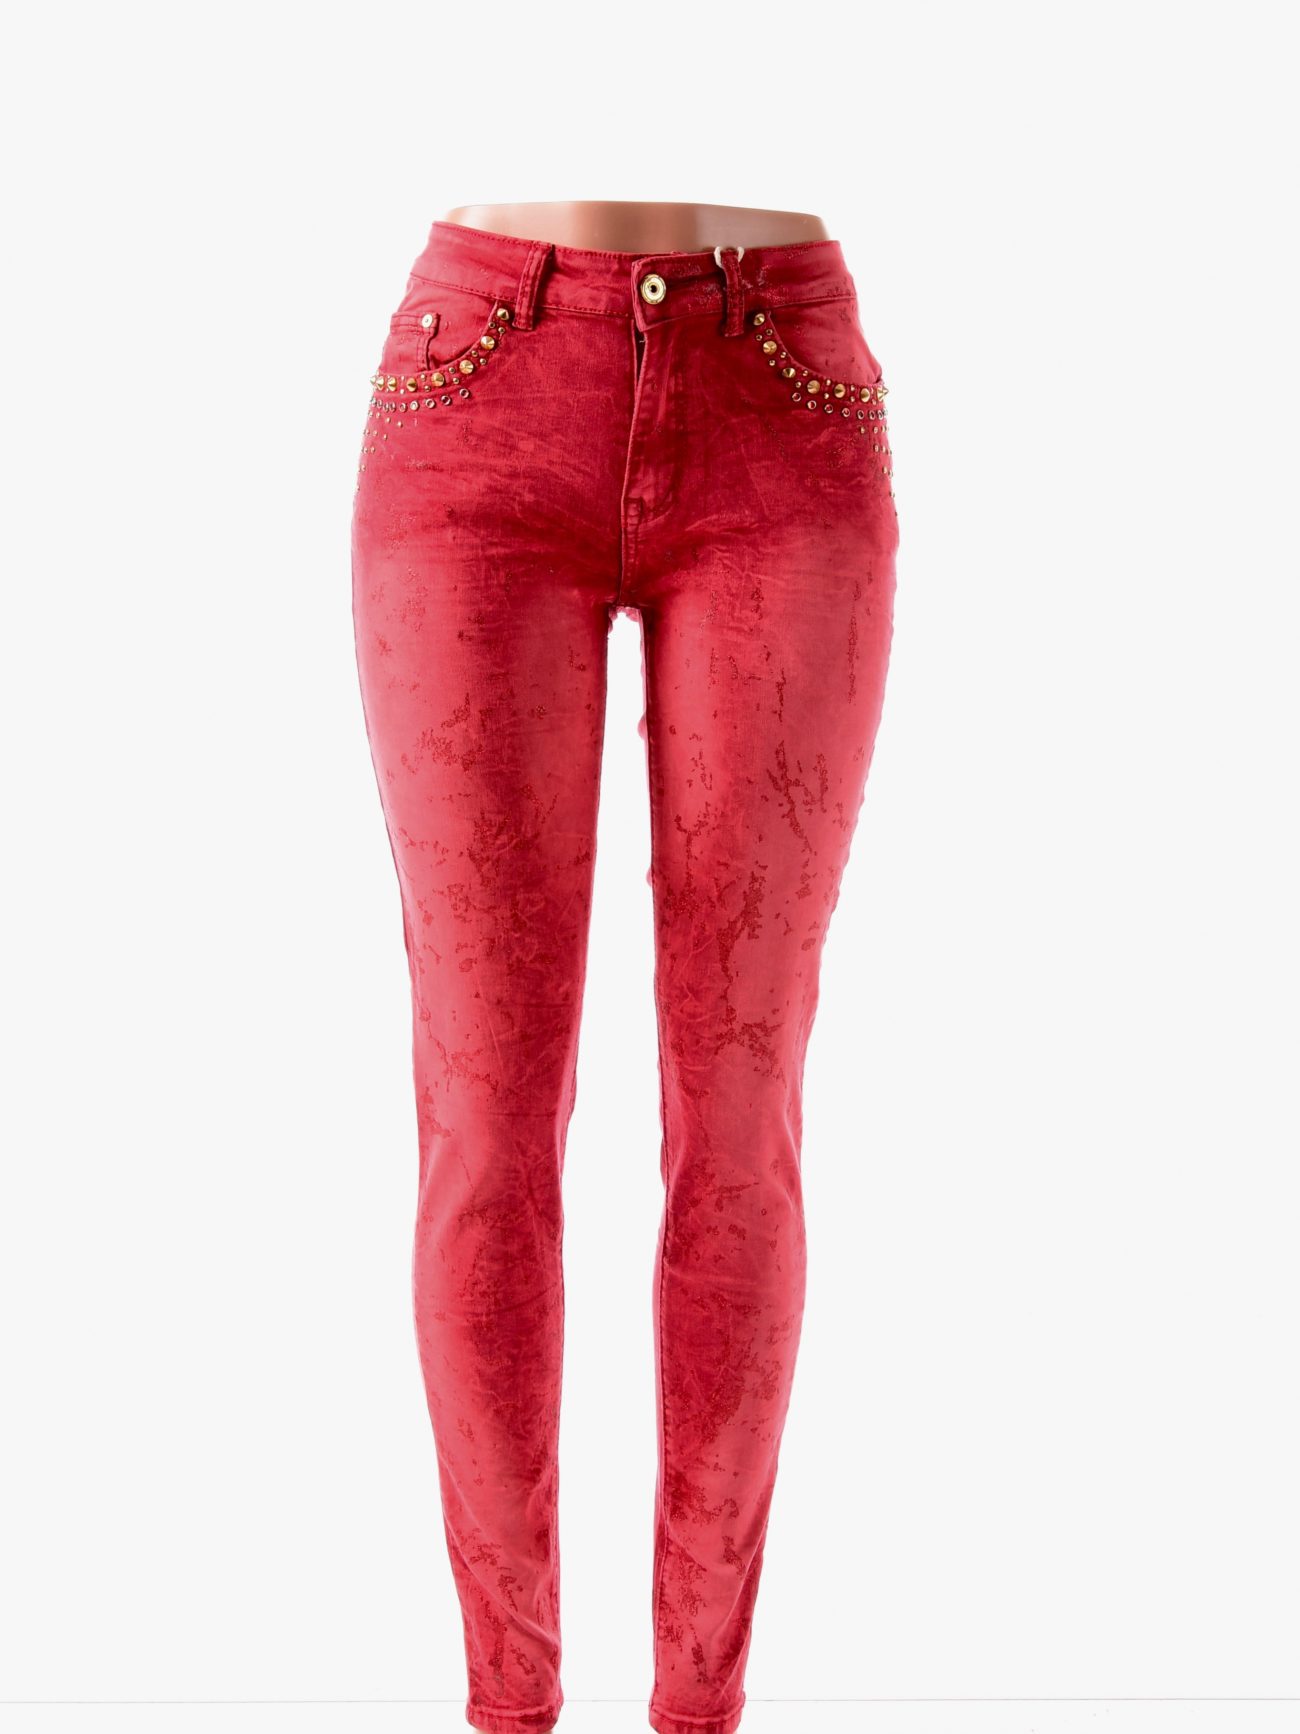 faded red jeans